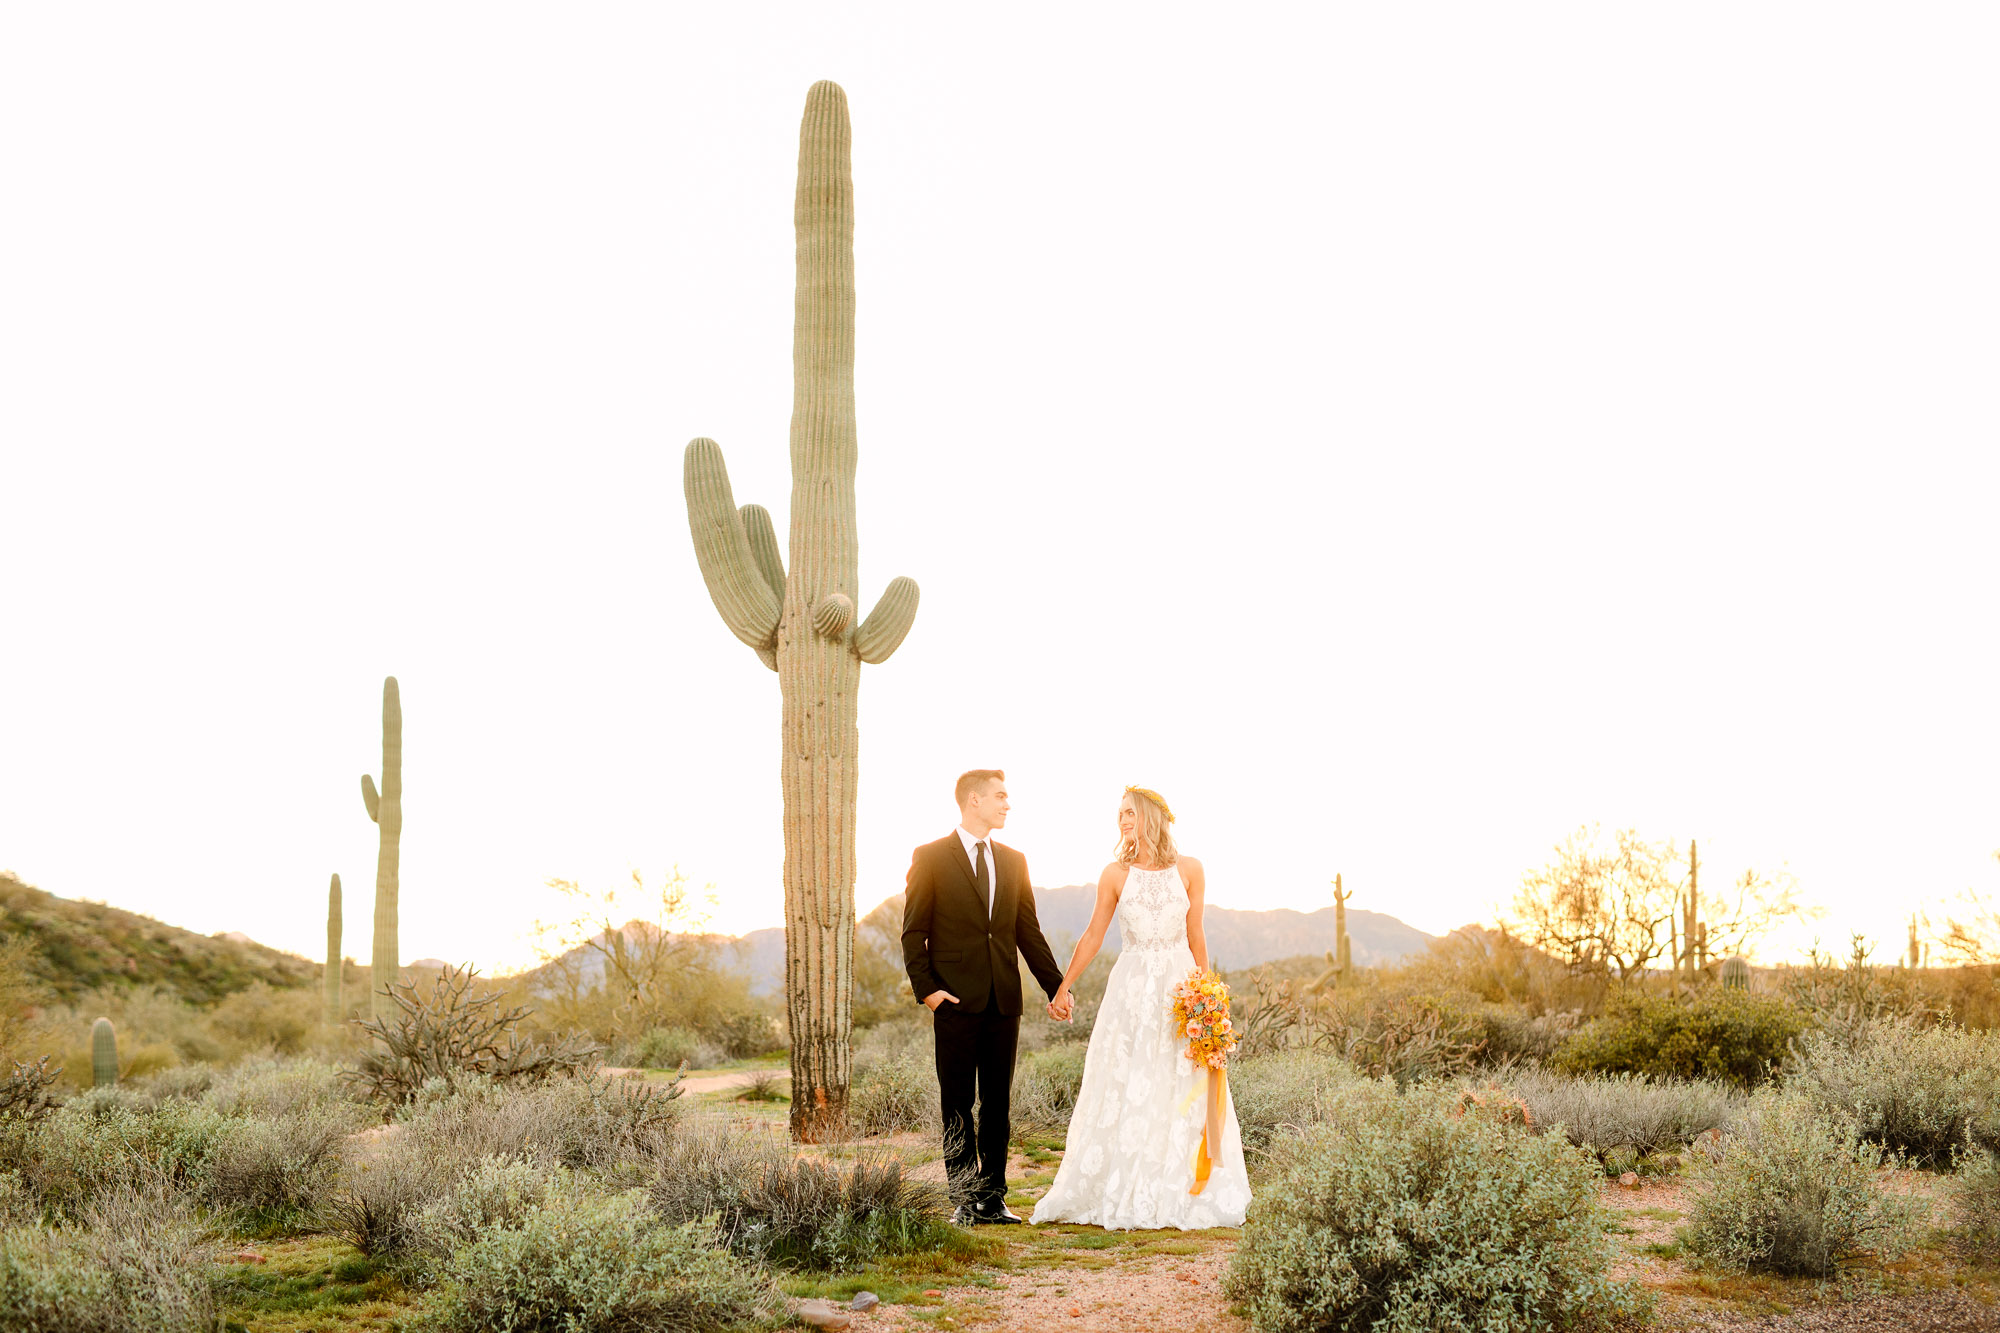 Couple with Saguaro cactus in Arizona by Mary Costa Photography